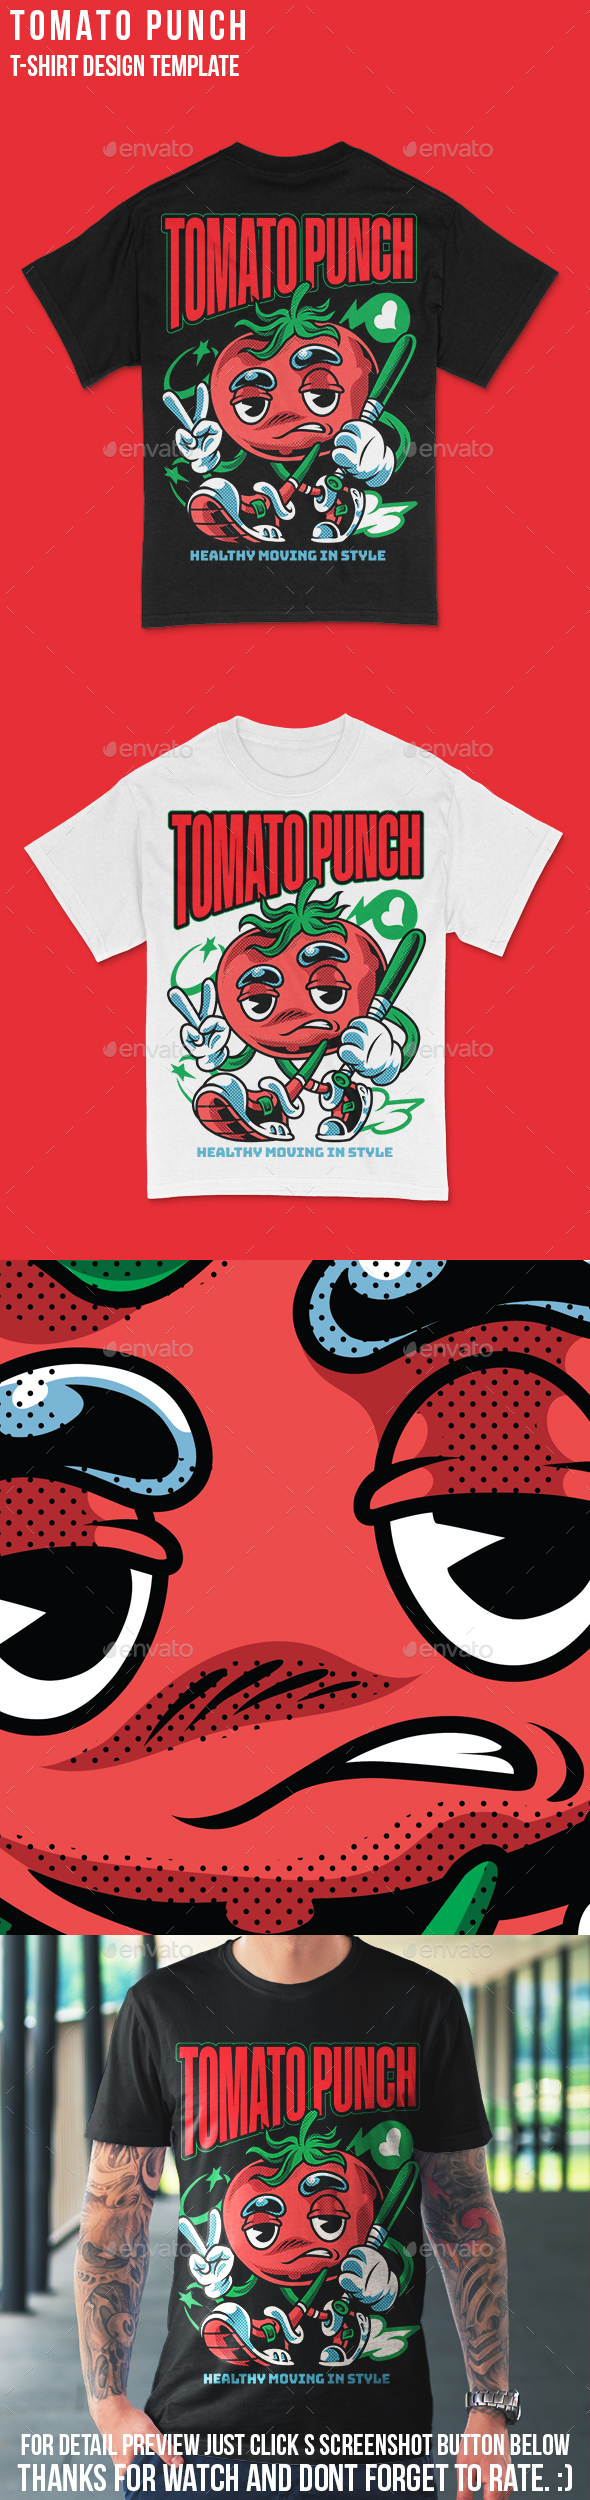 [DOWNLOAD]Tomato Punch T-Shirt Design Template